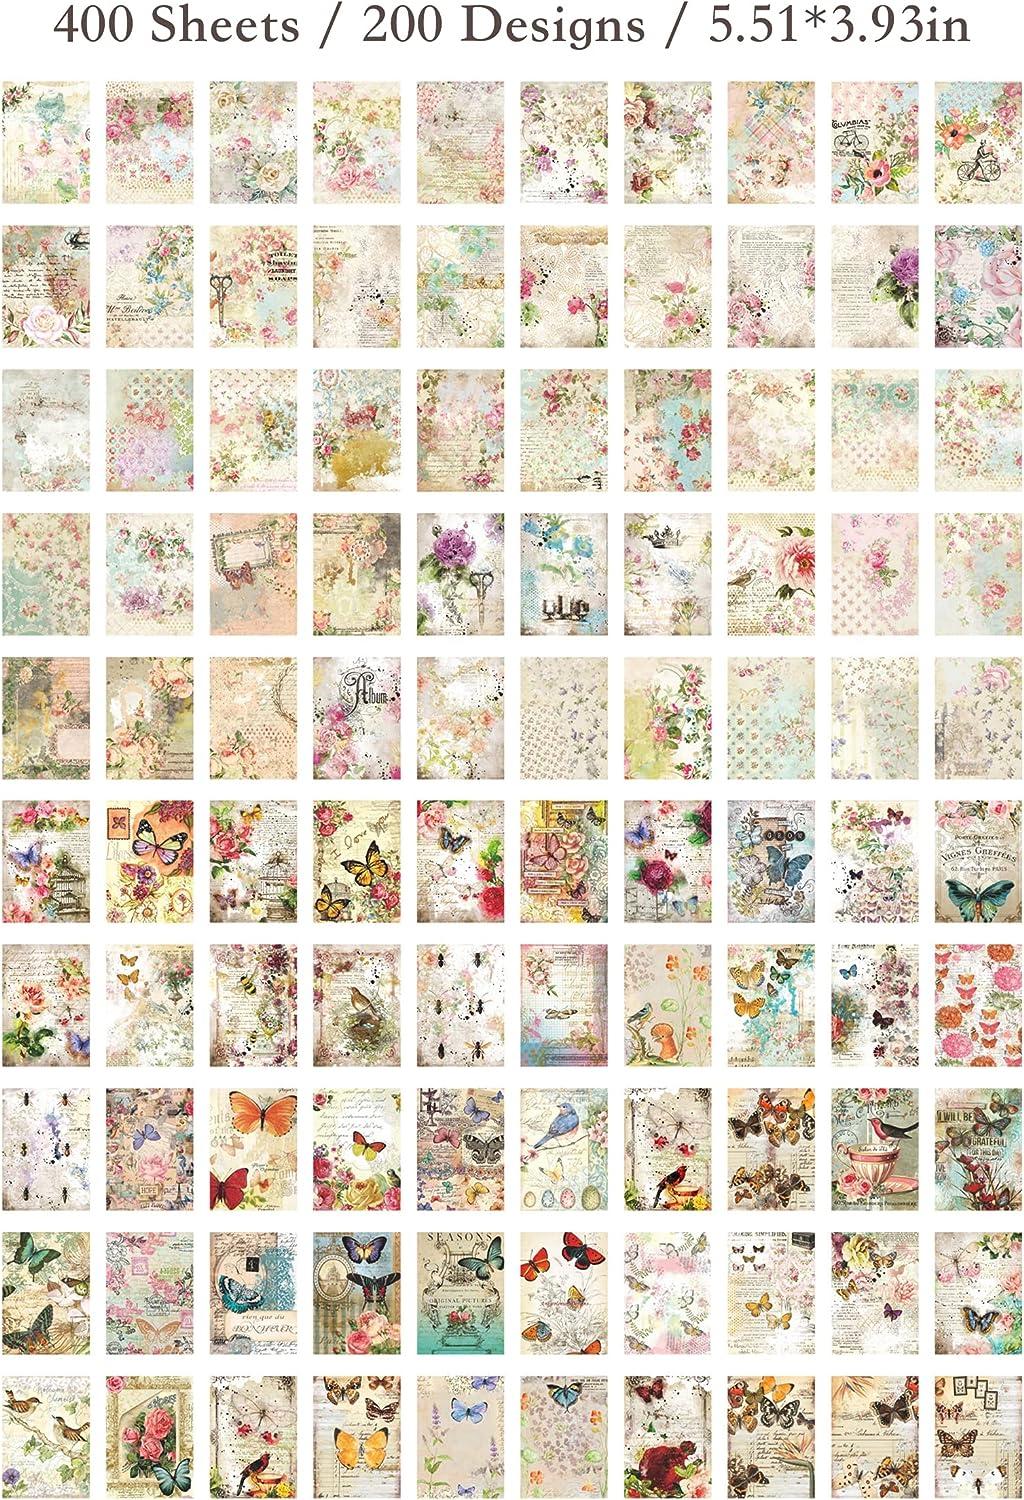 Designed Paper 400 Pages Journaling Supplies, Scrapbook Paper